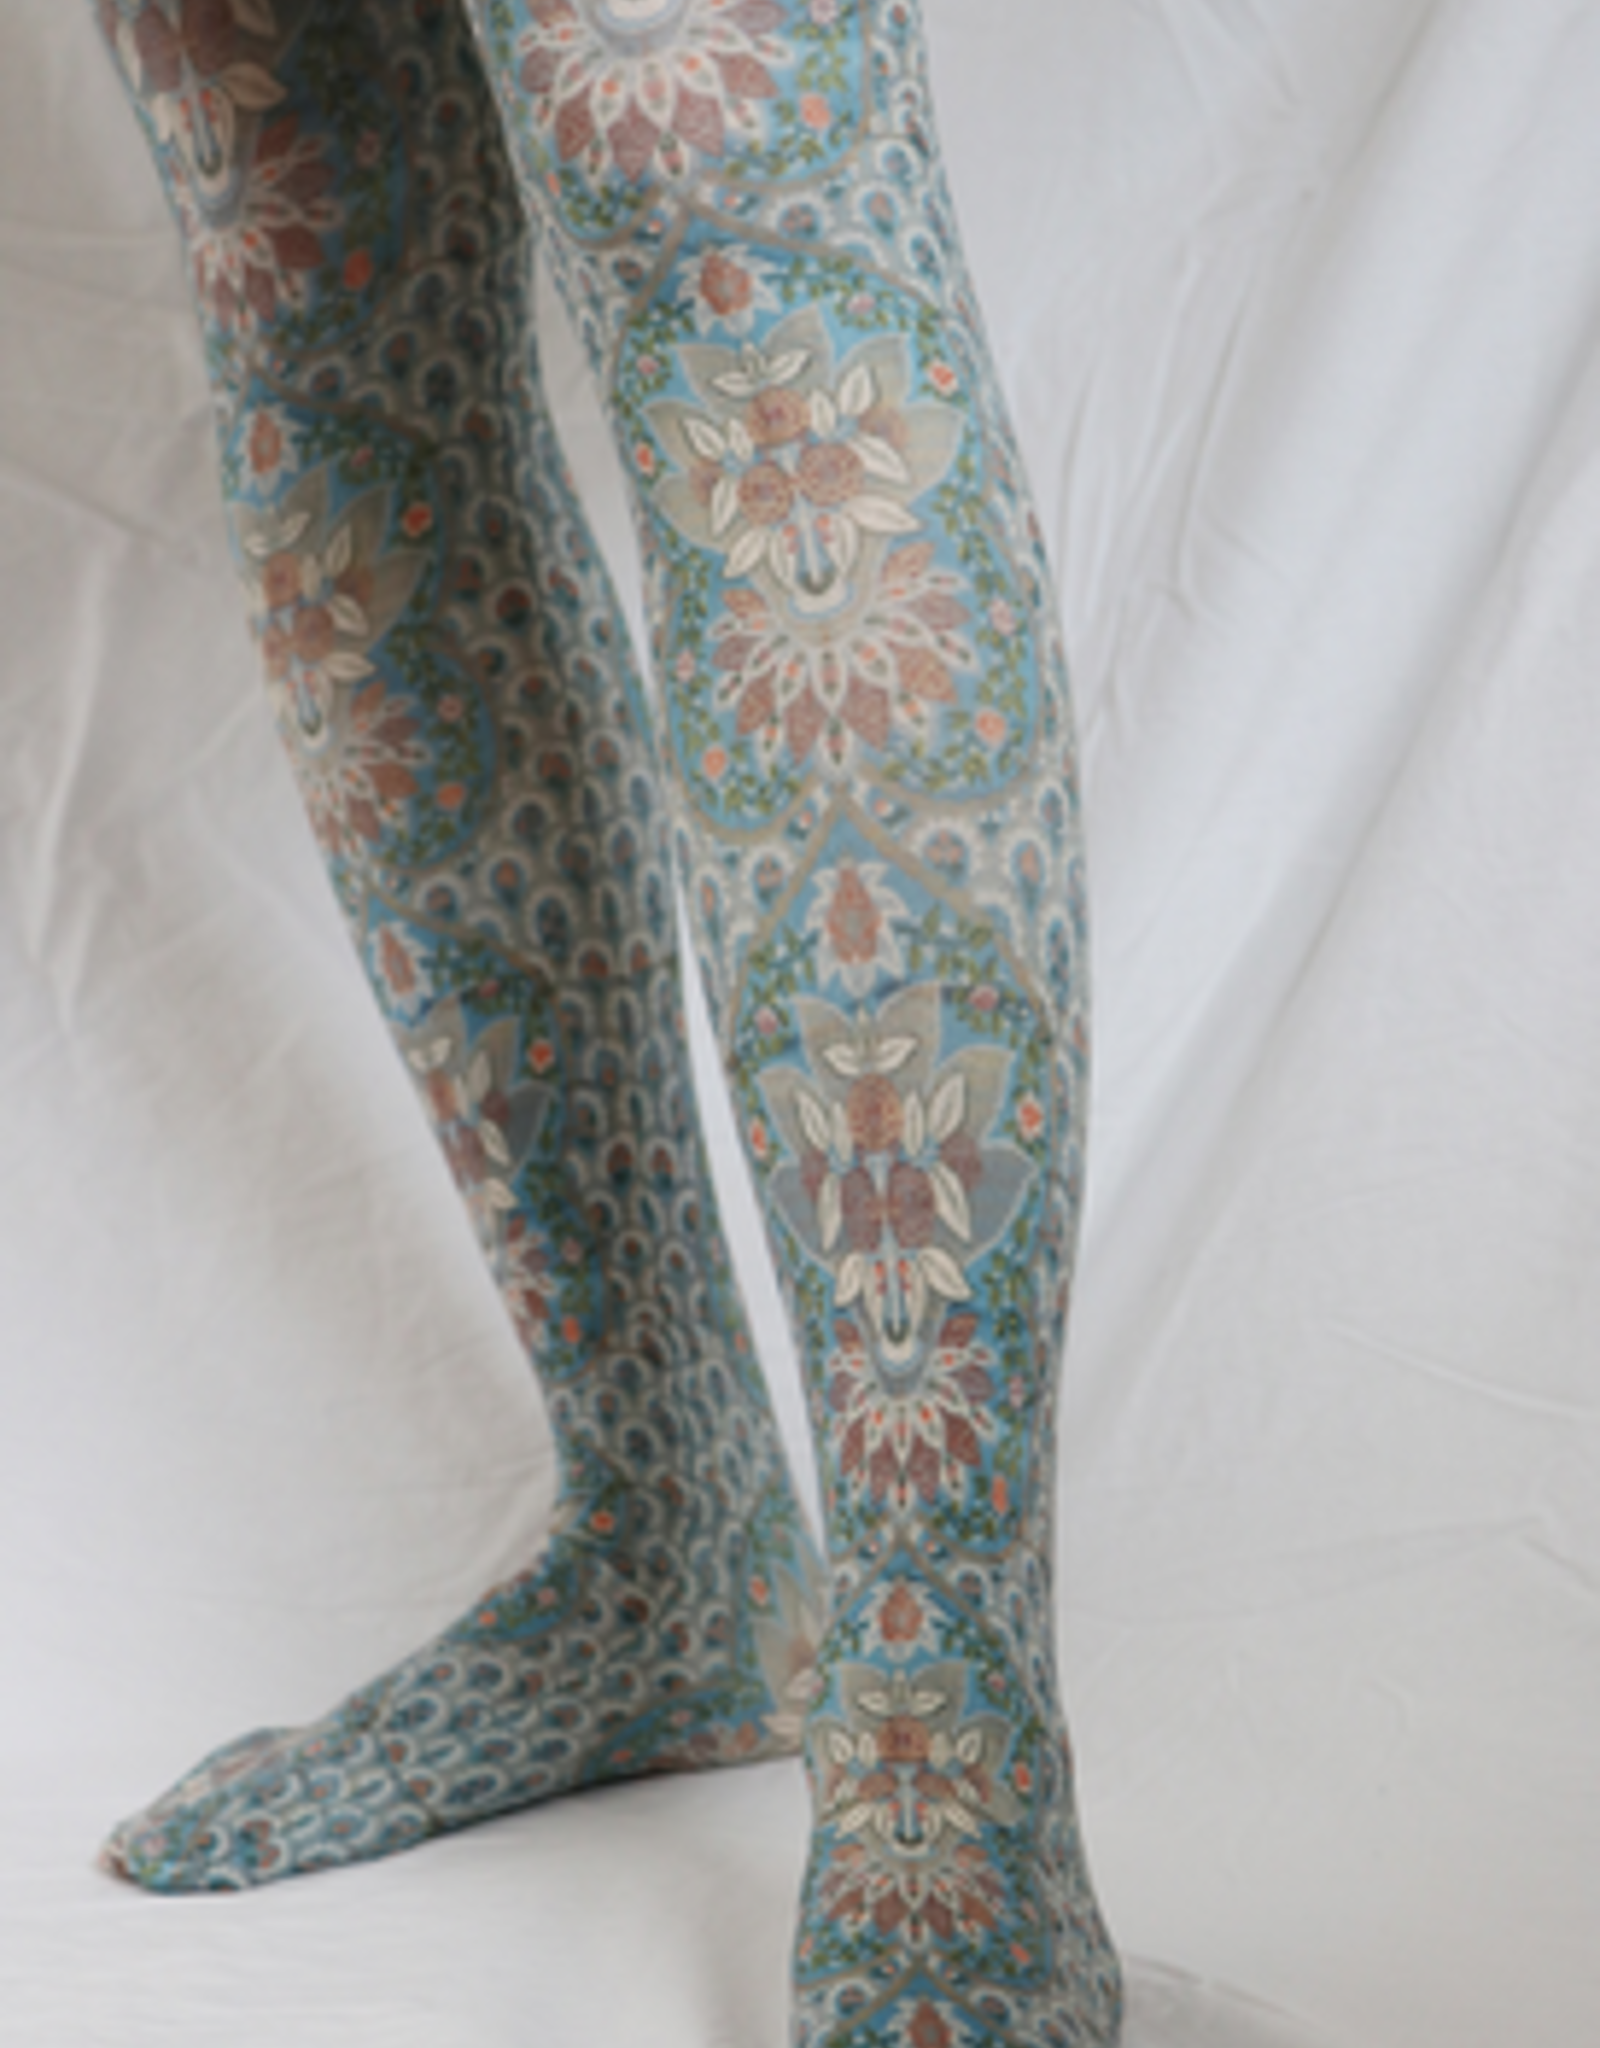 TIGHTS-PATTERN-MUSEUM OF ART2